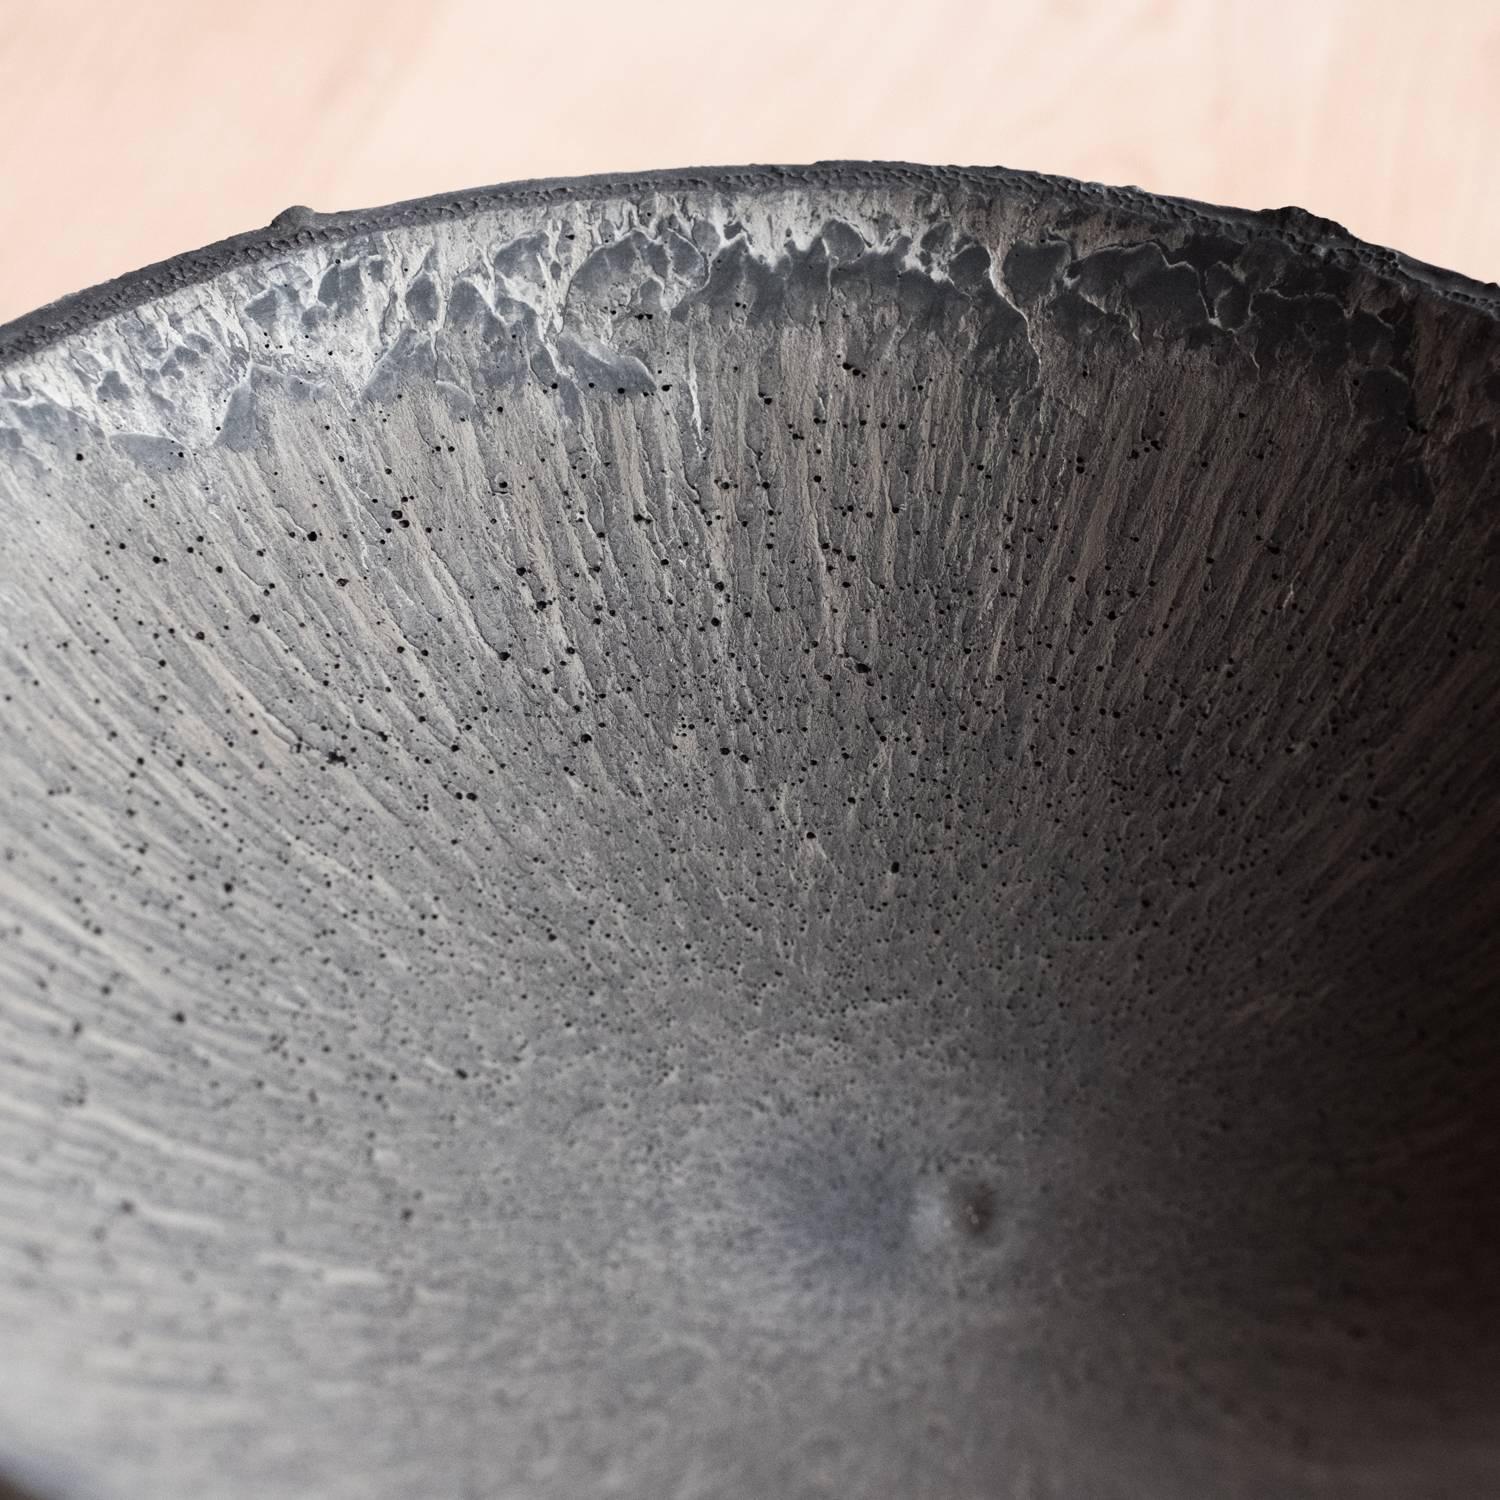 Handmade Cast Concrete Bowl in Black Charcoal by UMÉ Studio In New Condition For Sale In Oakland, CA